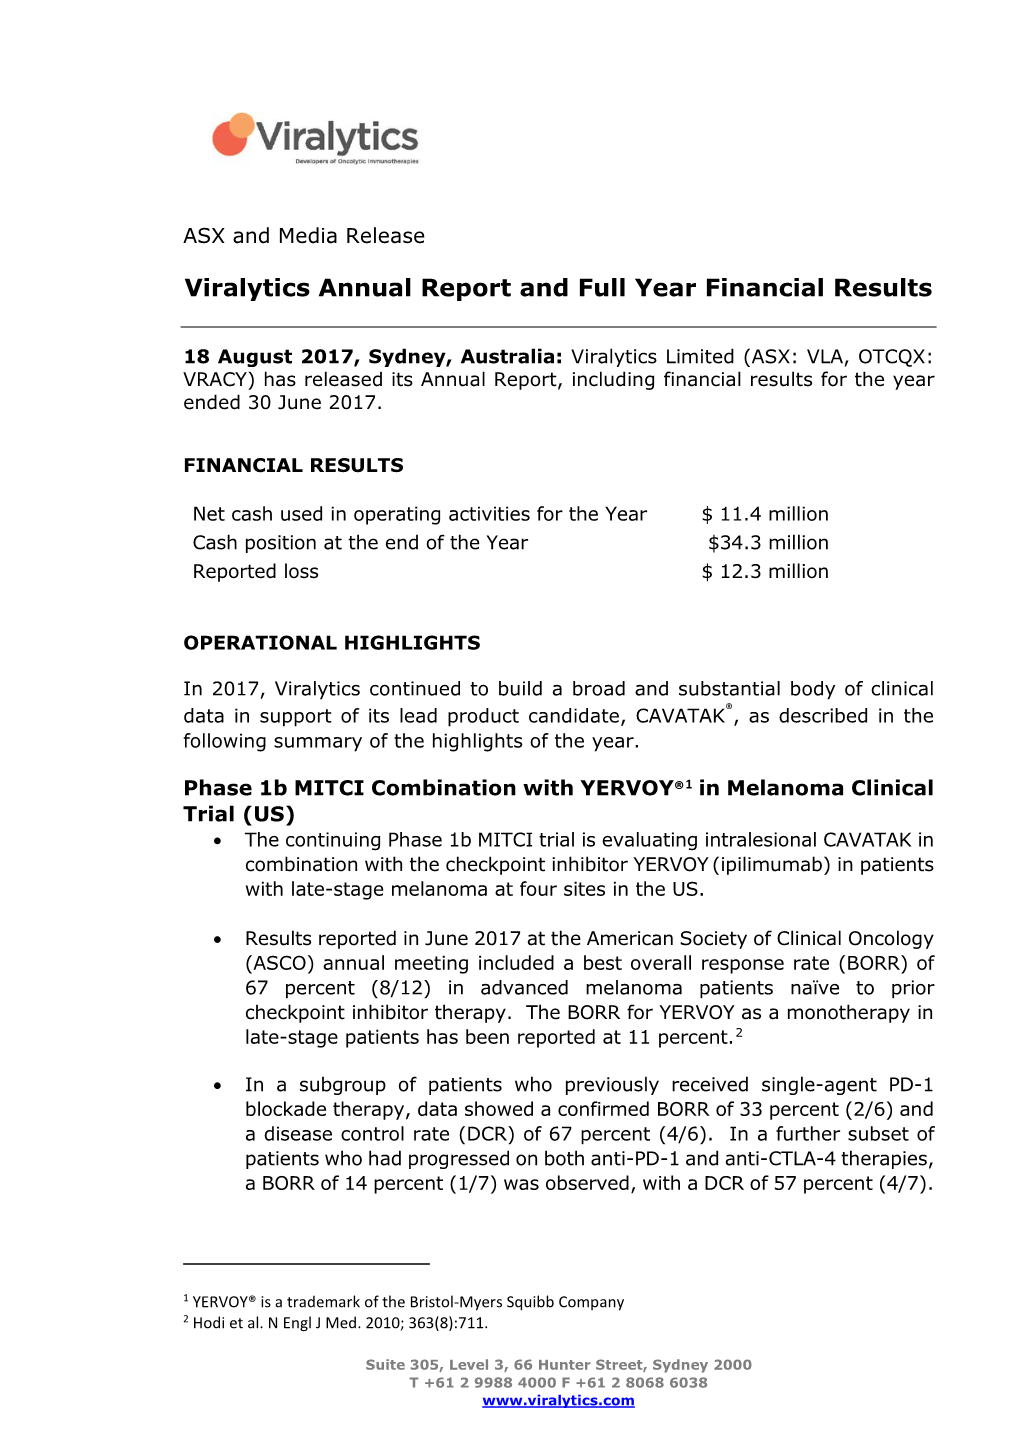 Viralytics Annual Report and Full Year Financial Results